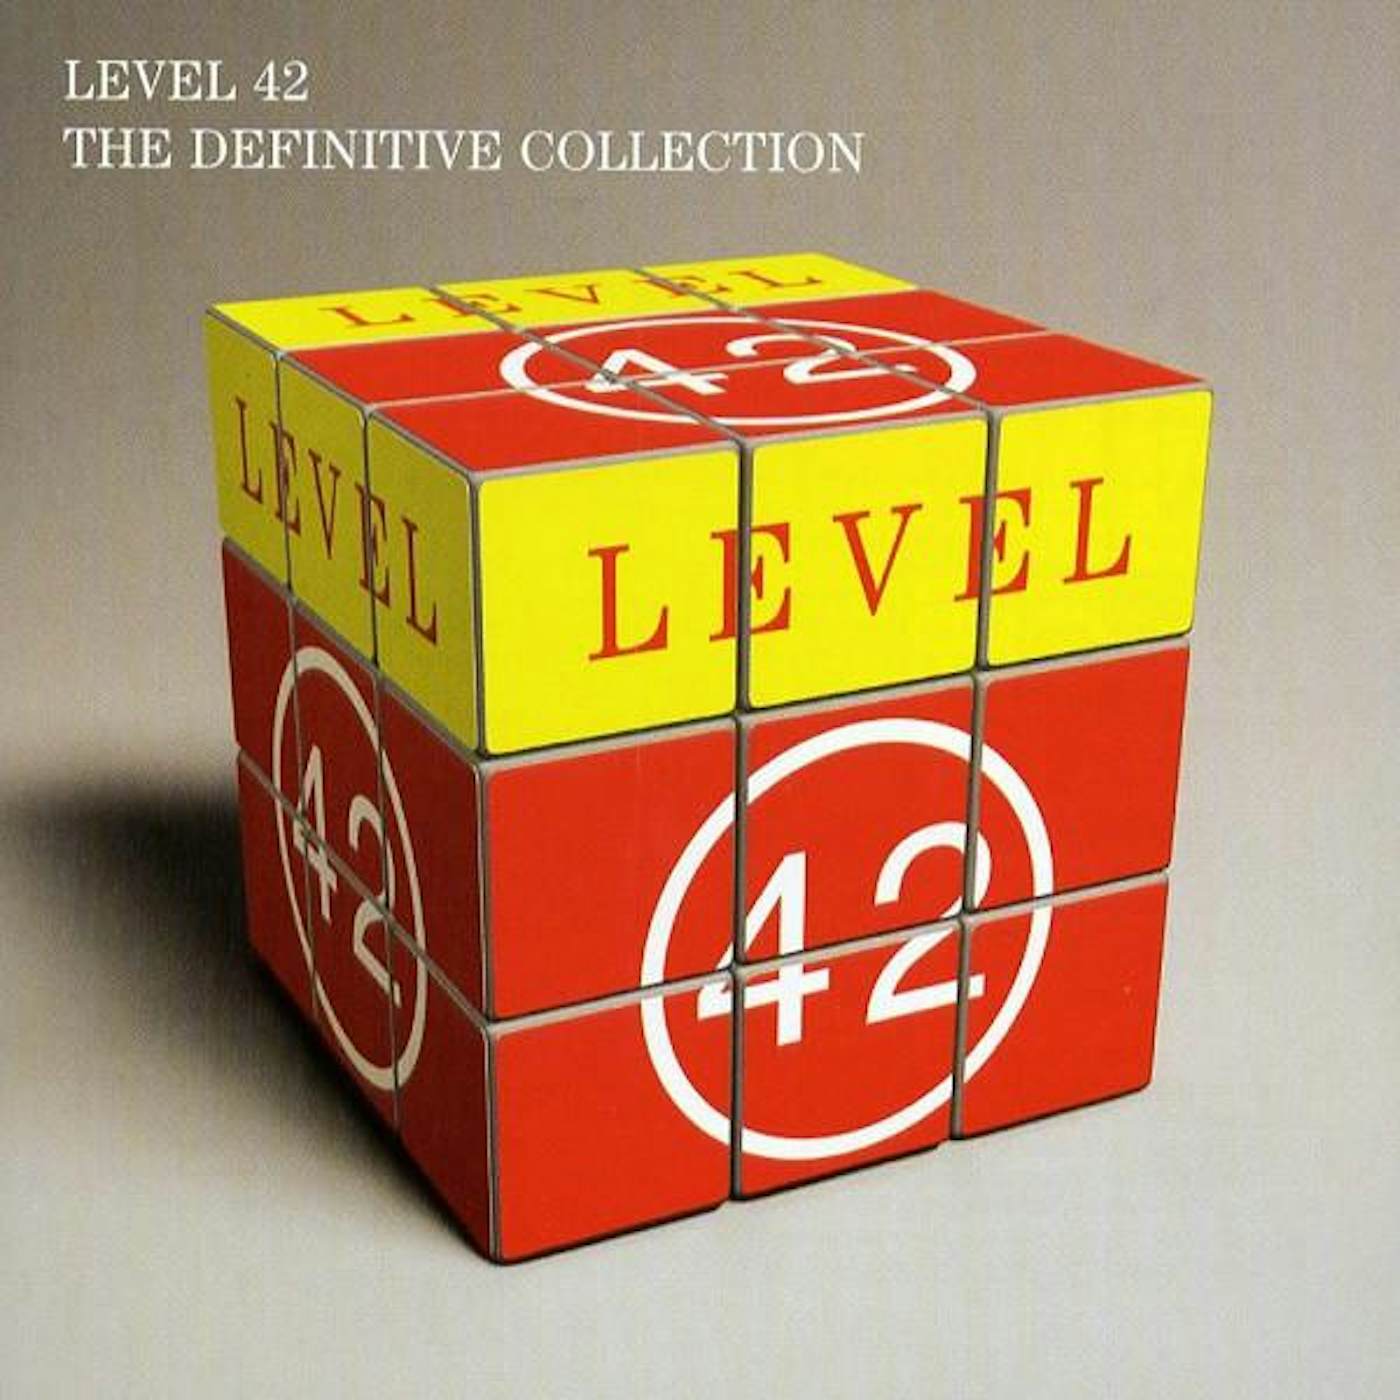 Level 42 DEFINITIVE COLLECTION CD